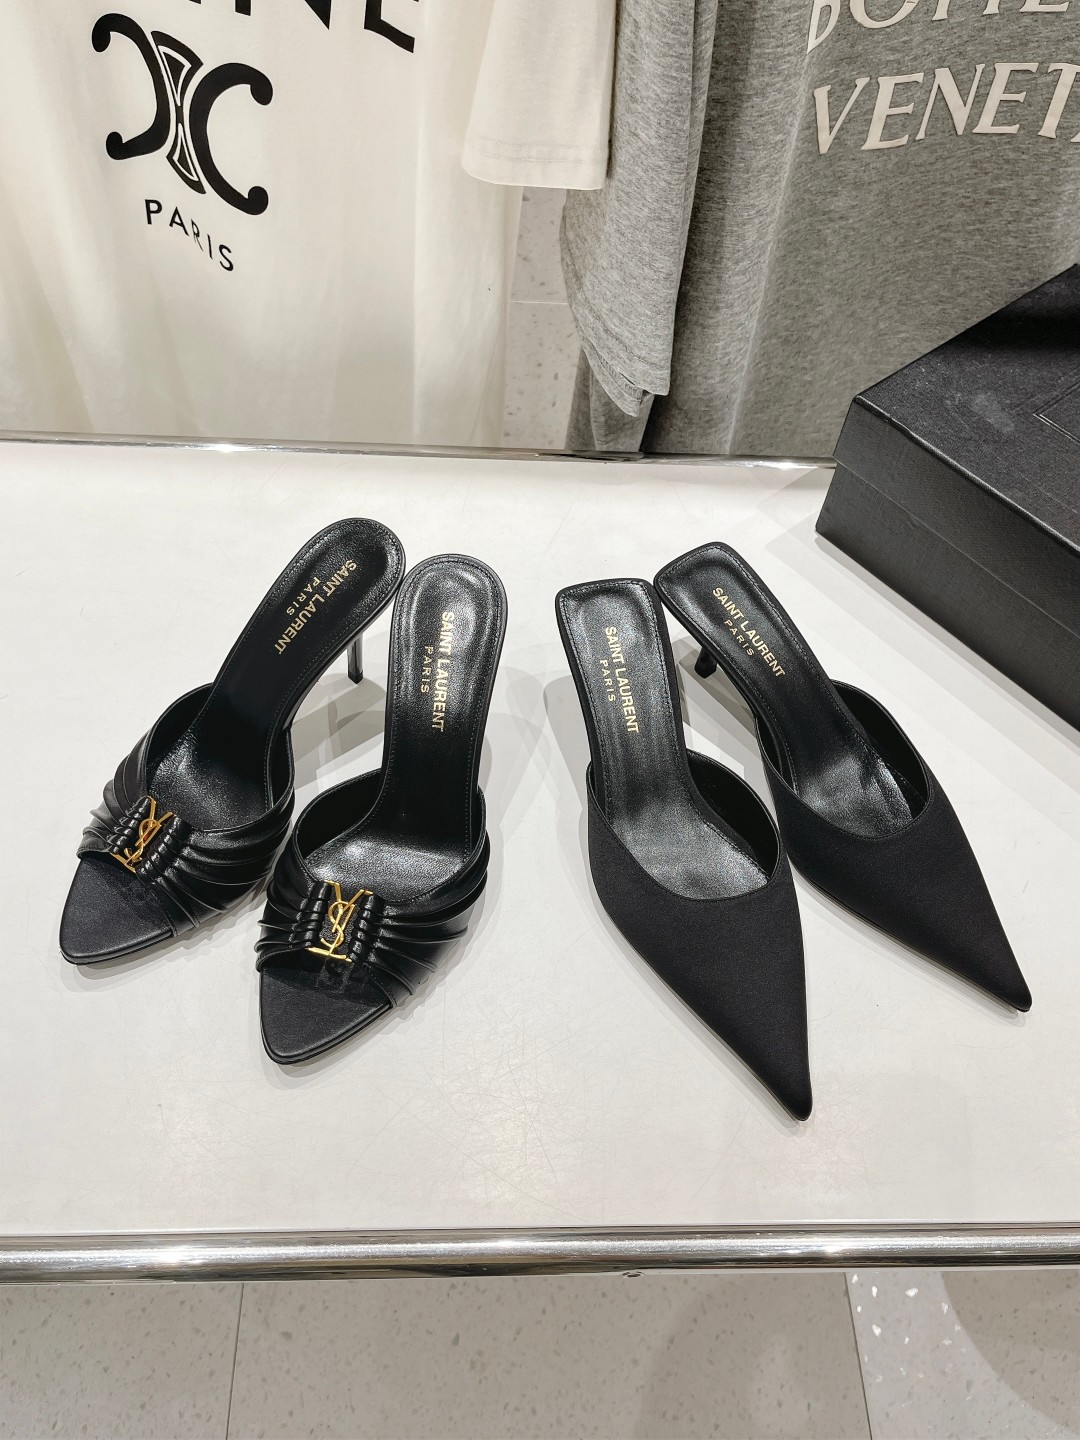 Yves Saint Laurent Shoes High Heel Pumps Slippers Sell Online Luxury Designer
 Summer Collection